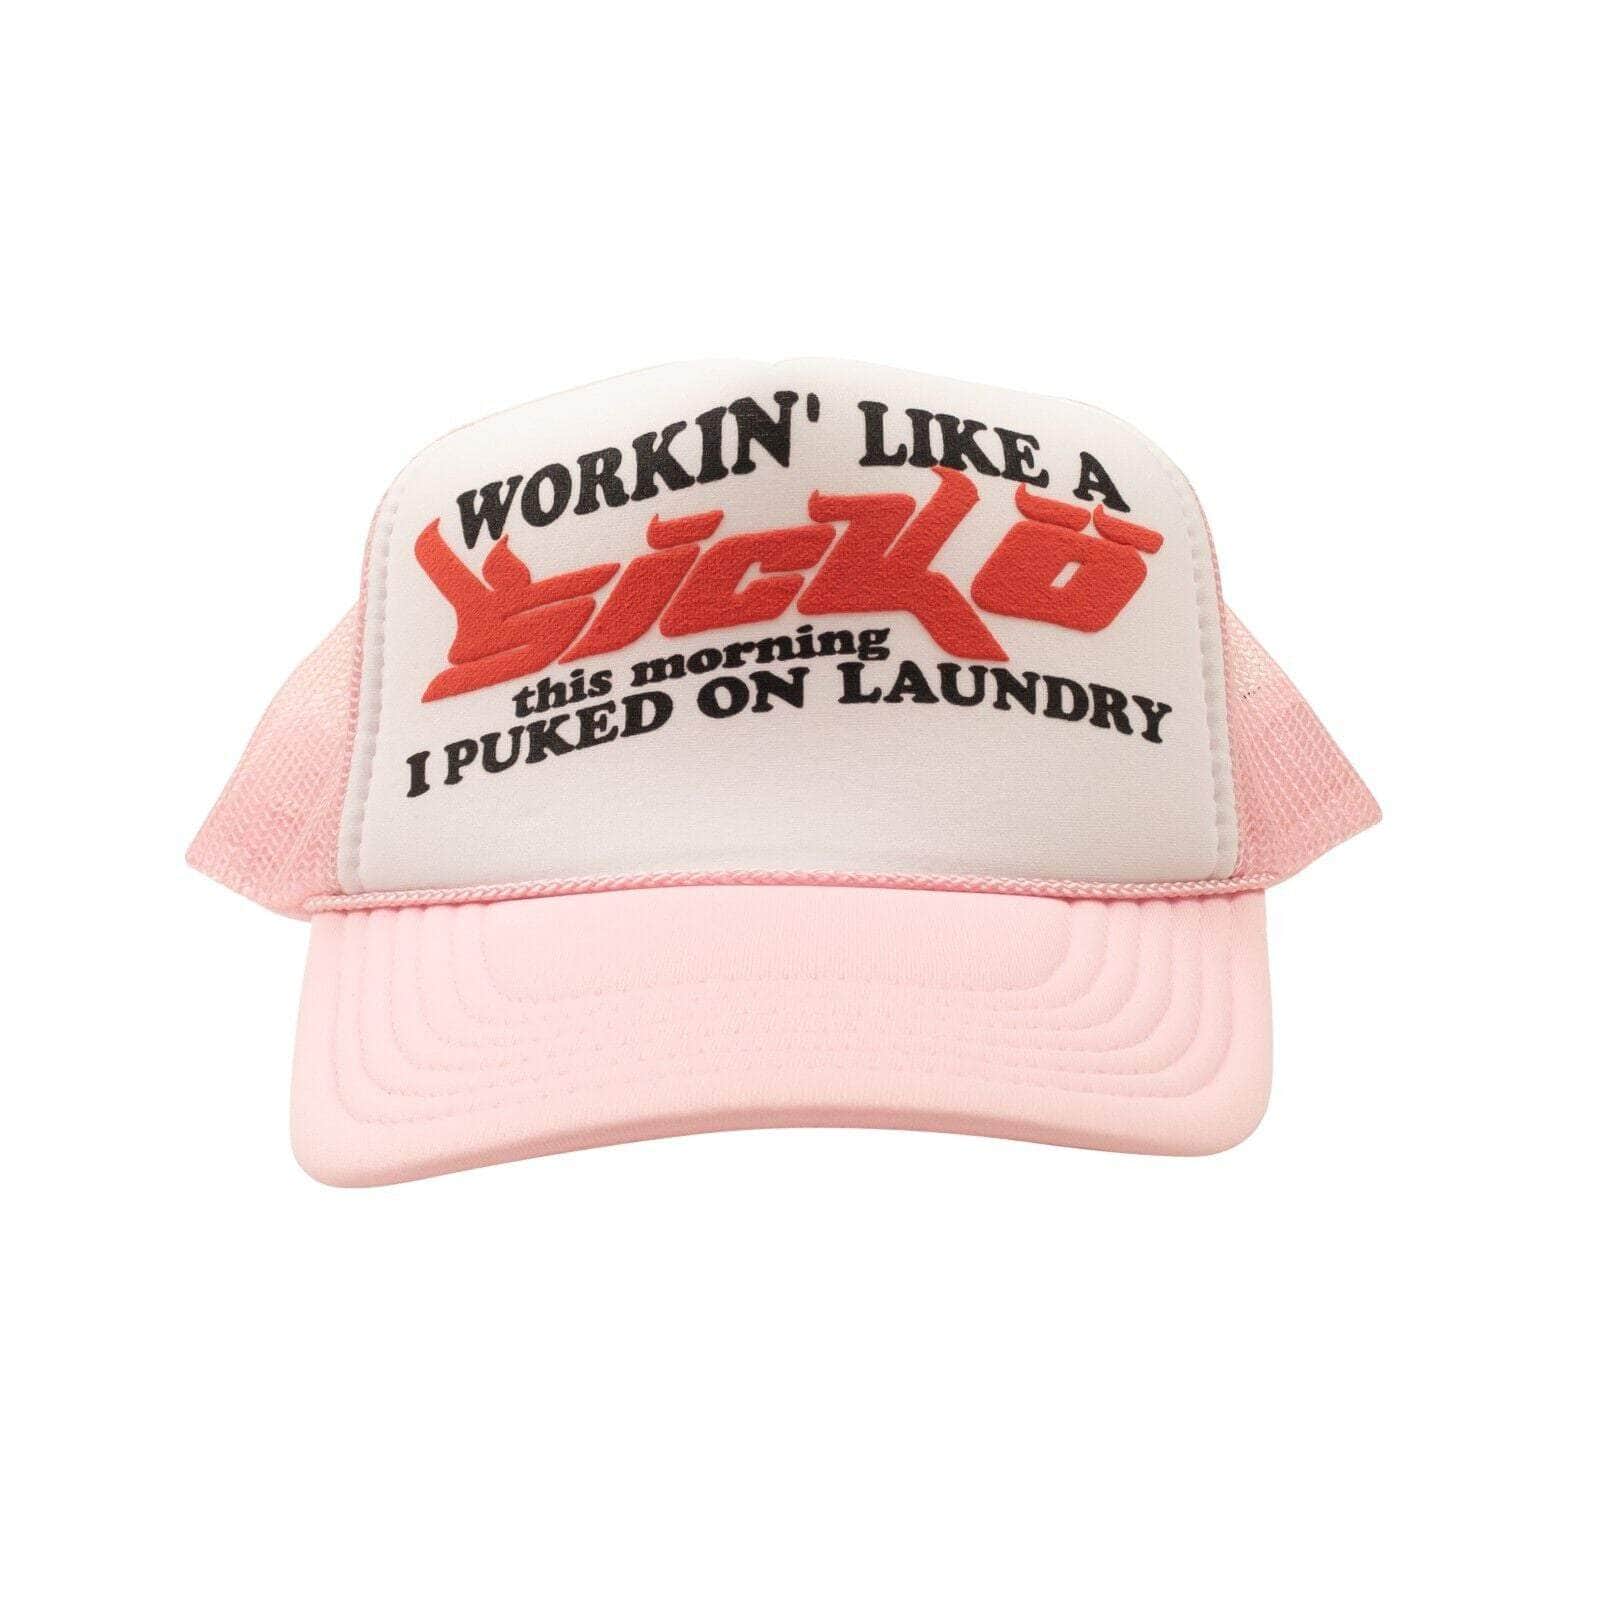 Sicko channelenable-all, chicmi, couponcollection, gender-mens, main-accessories, mens-shoes, sicko, size-os, under-250 OS Light Pink And White Working Like a Sicko Trucker Hat SCK-XACC-0011/OS SCK-XACC-0011/OS